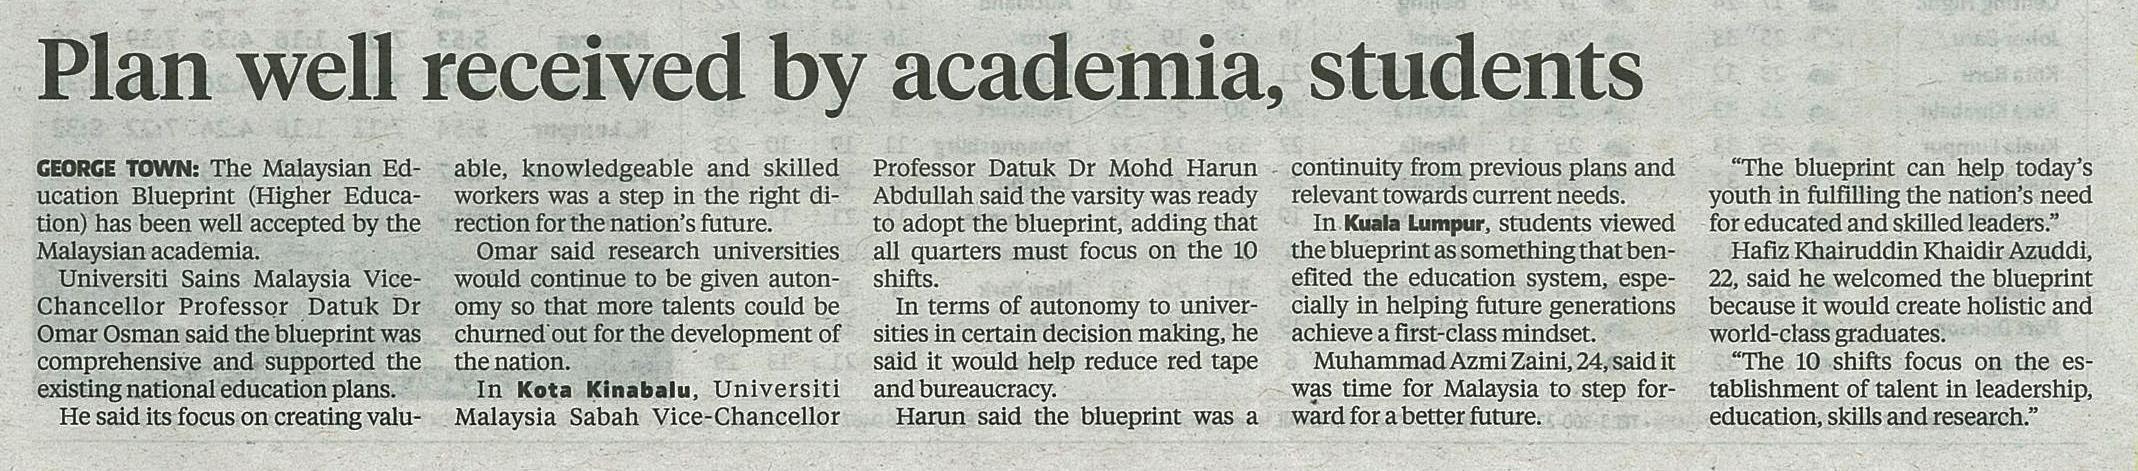 8 April 2015 Plan well received by academia students NST